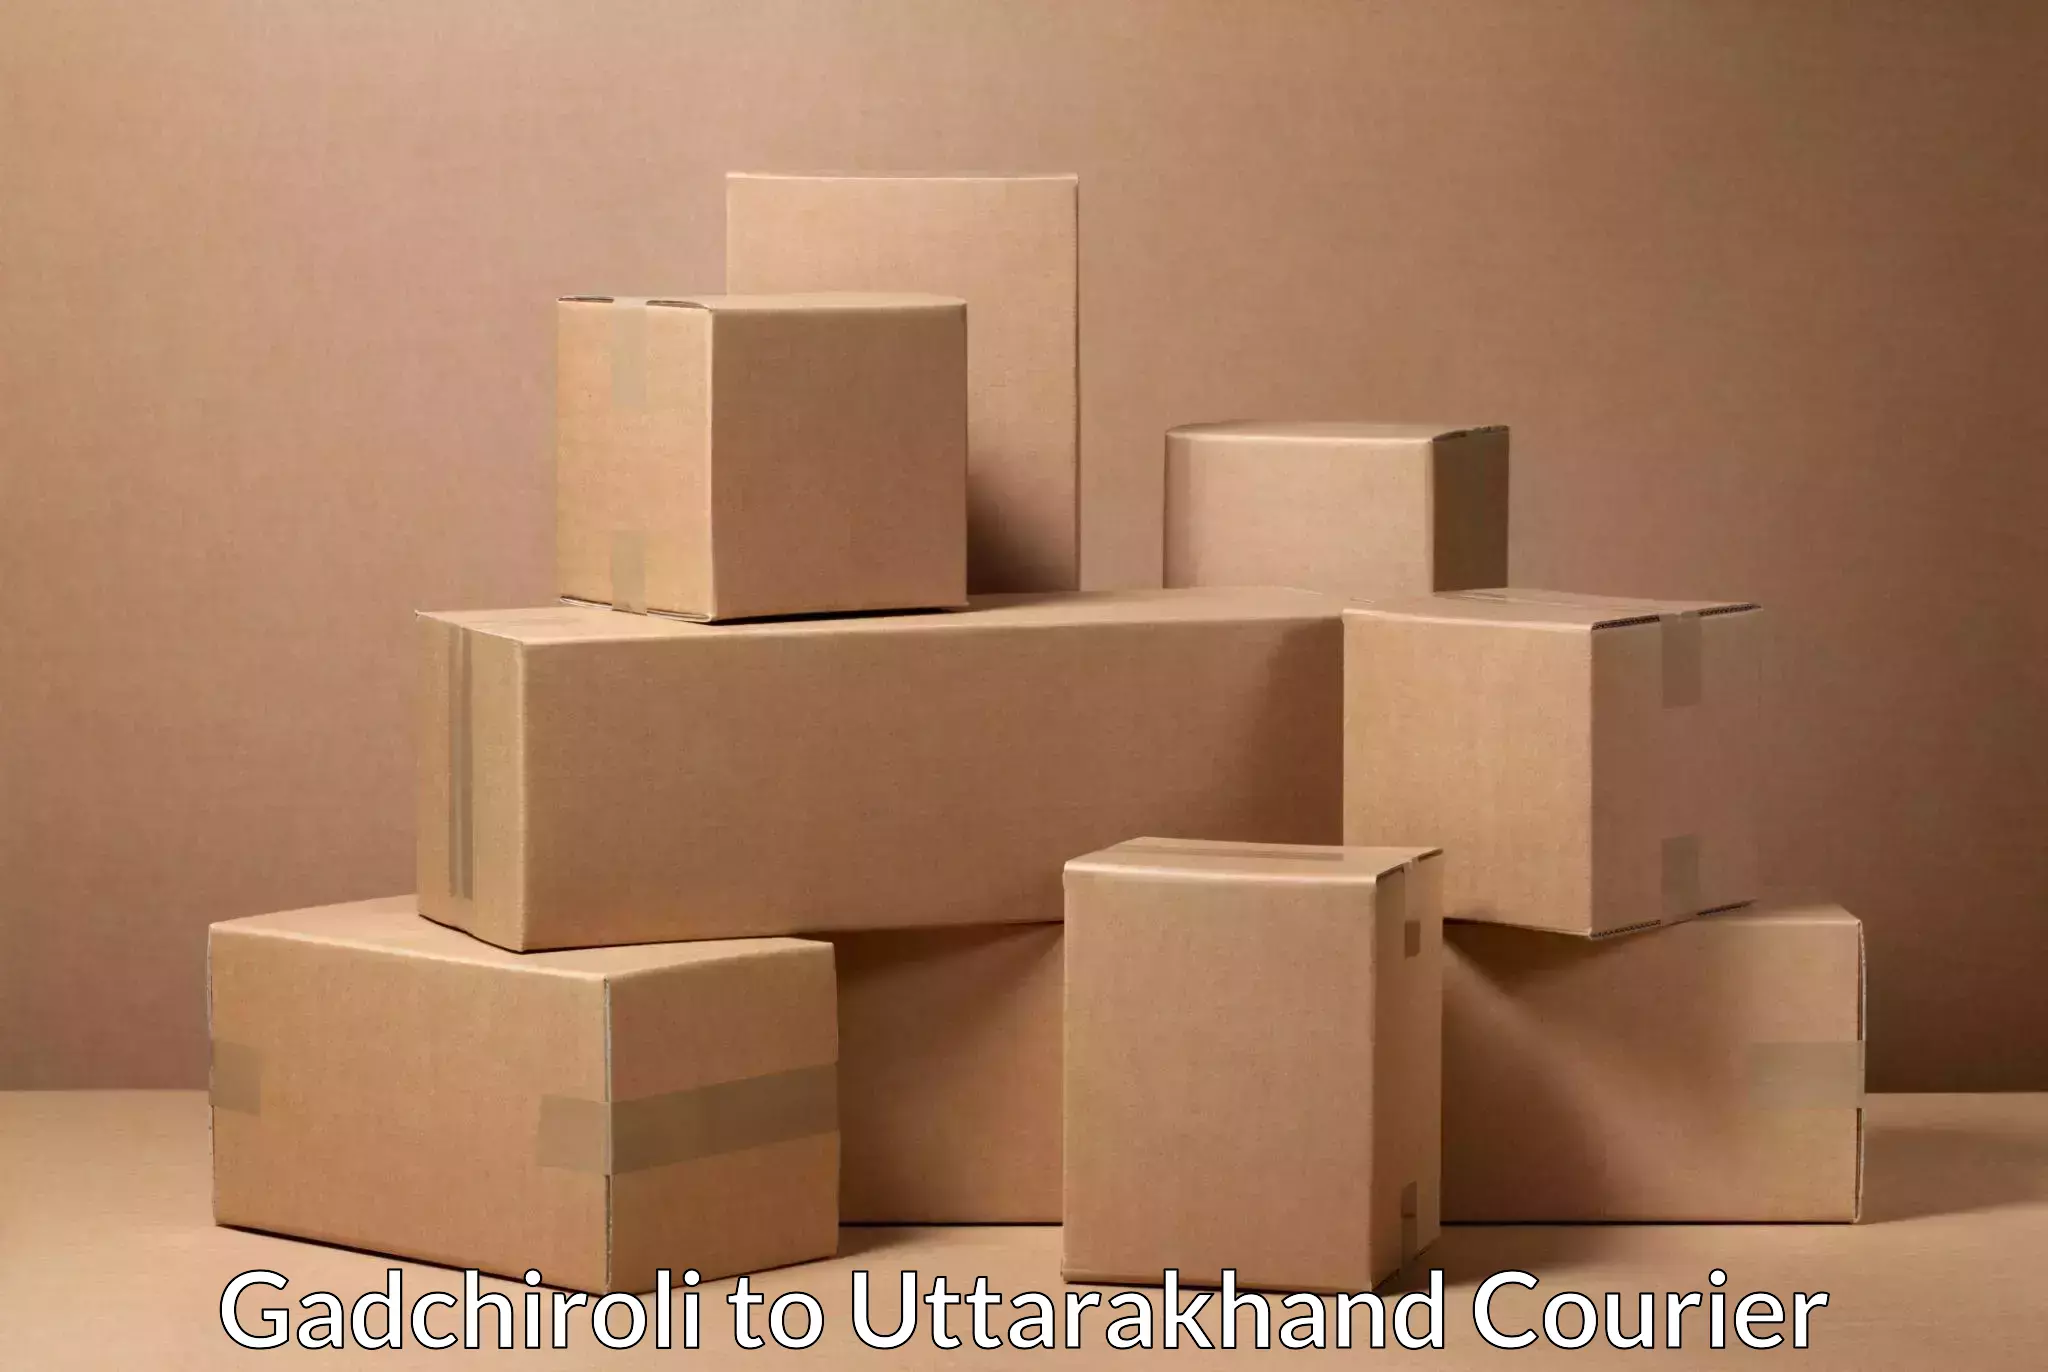 Full-service courier options Gadchiroli to Bageshwar